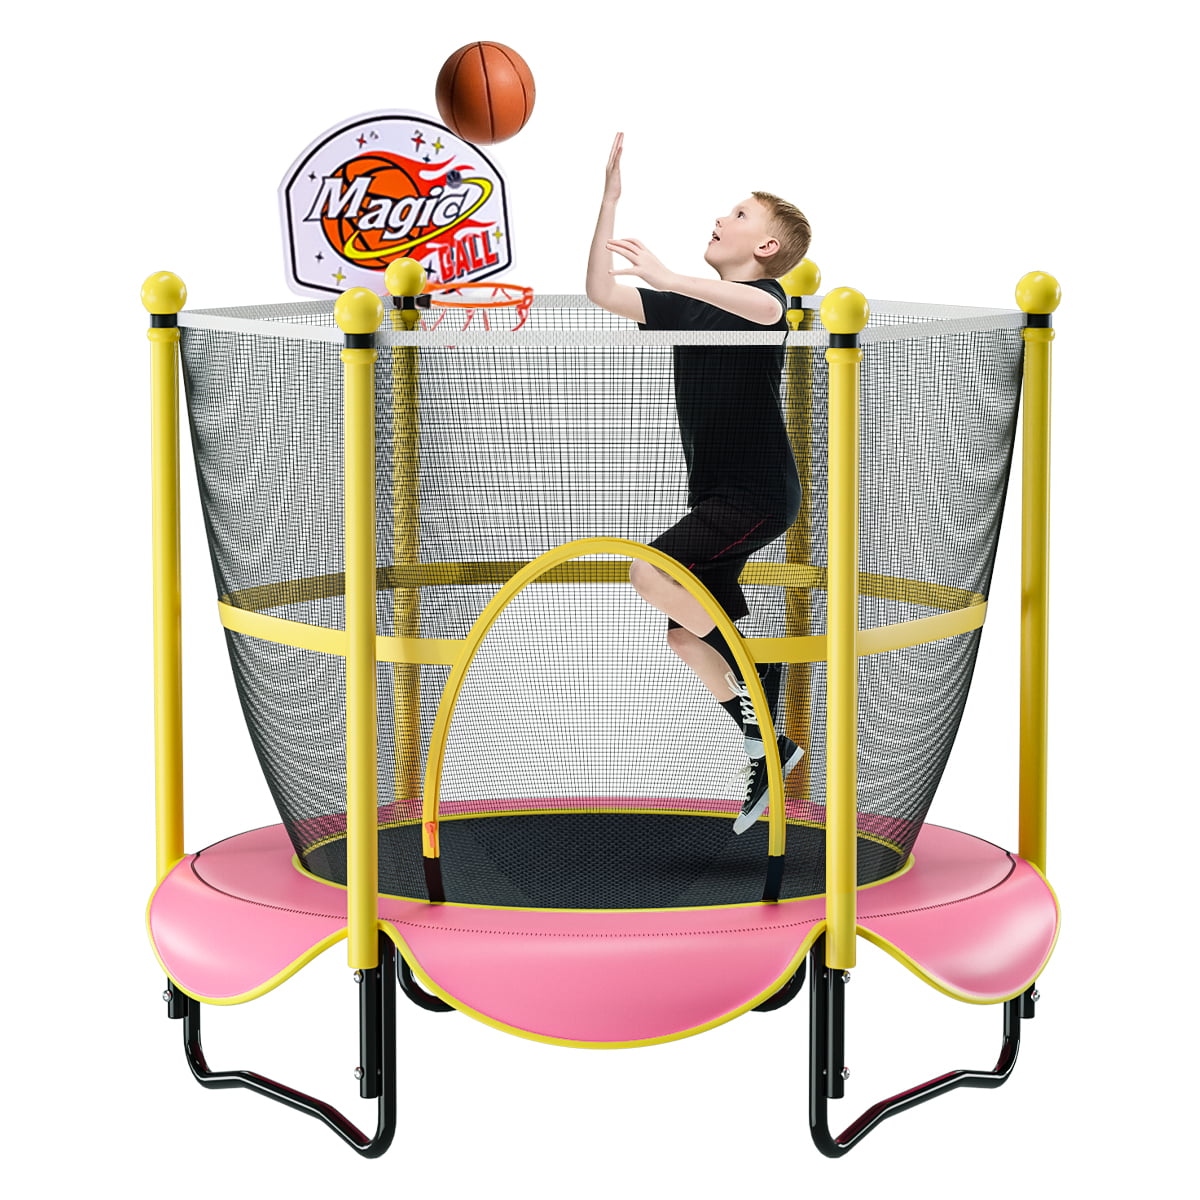 60 Trampoline for Kids Birthday Gifts for Kids Gifts for Boy and Girl can Hold up to 442 lbs 5 Ft Indoor or Outdoor Toddler Trampoline with Safety Enclosure Baby Toddler Trampoline Toys 